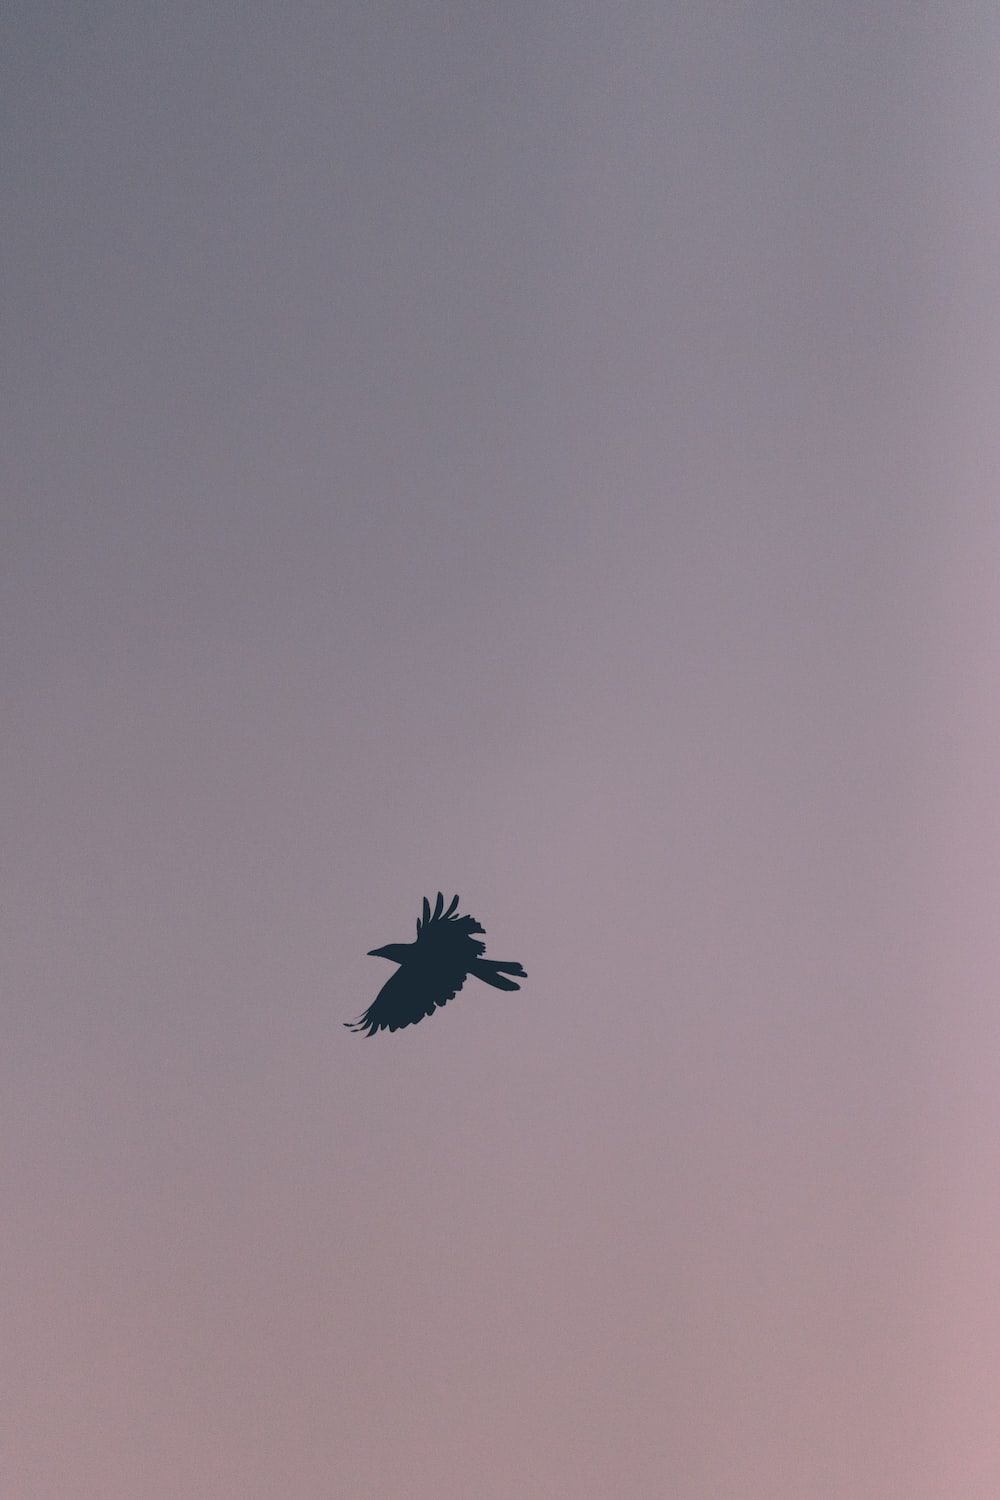 a bird flying in the sky at dusk photo